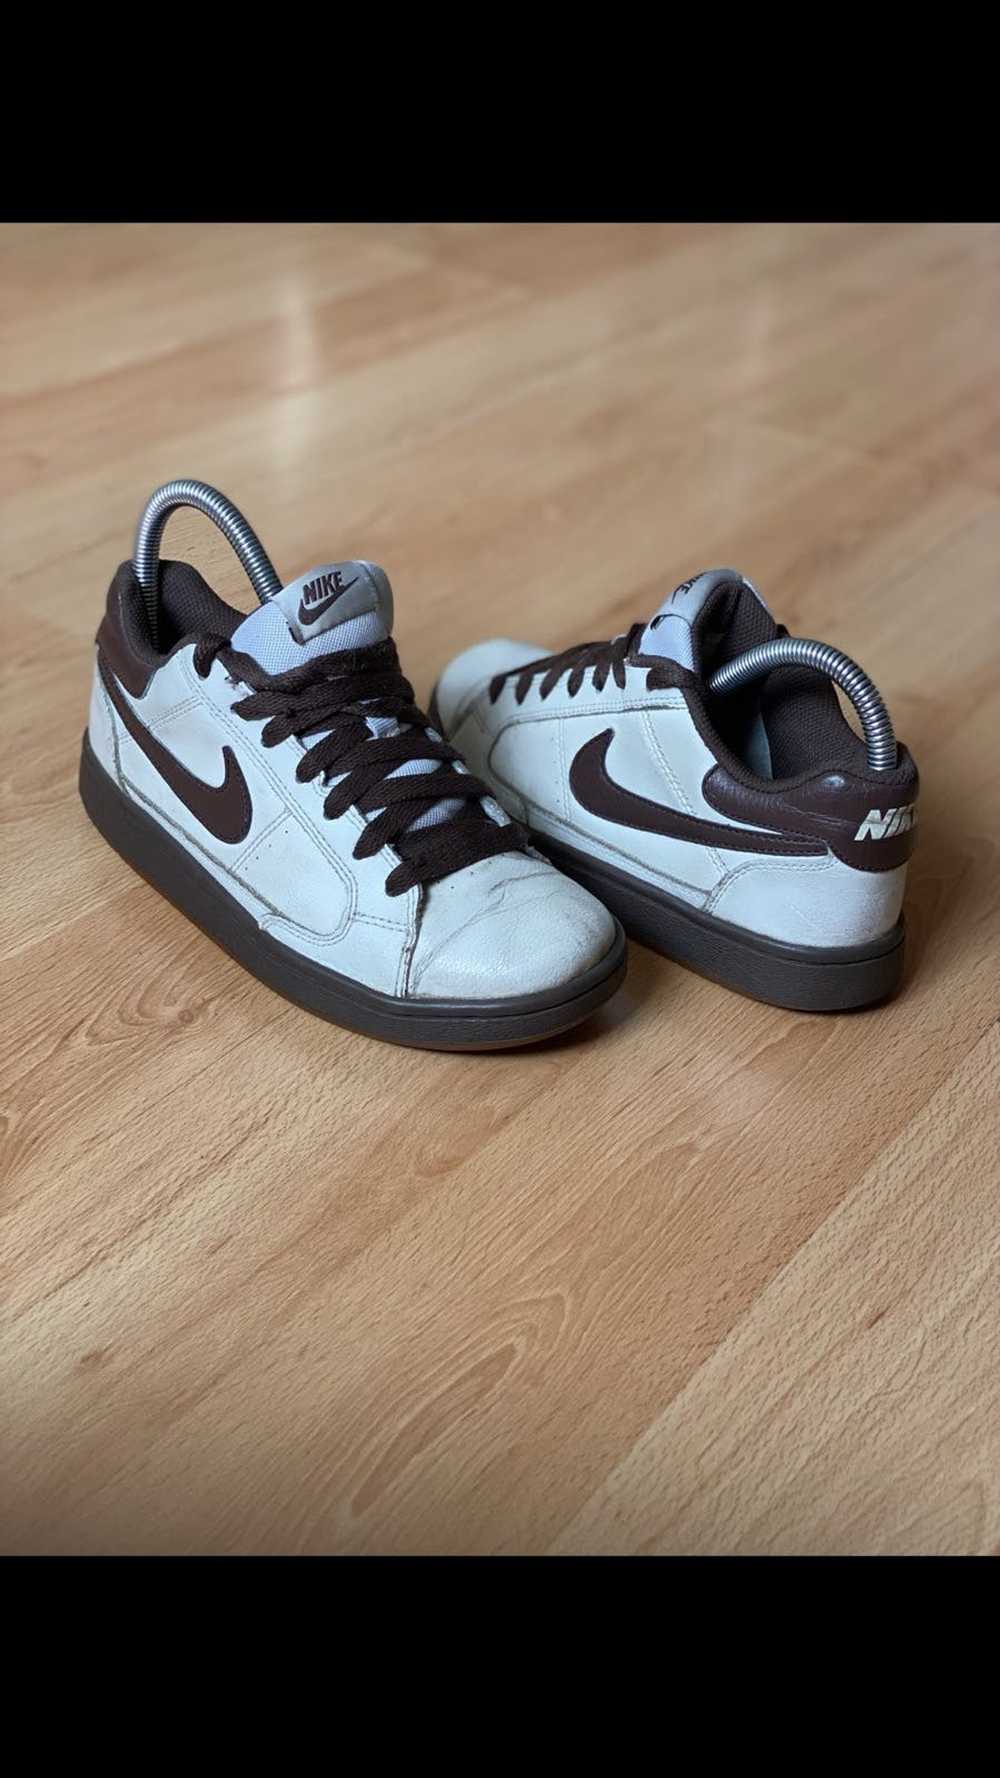 WTS] Dior Dunk custom “Vior” by Vandy The Pink $550 Shipped :  r/sneakermarket